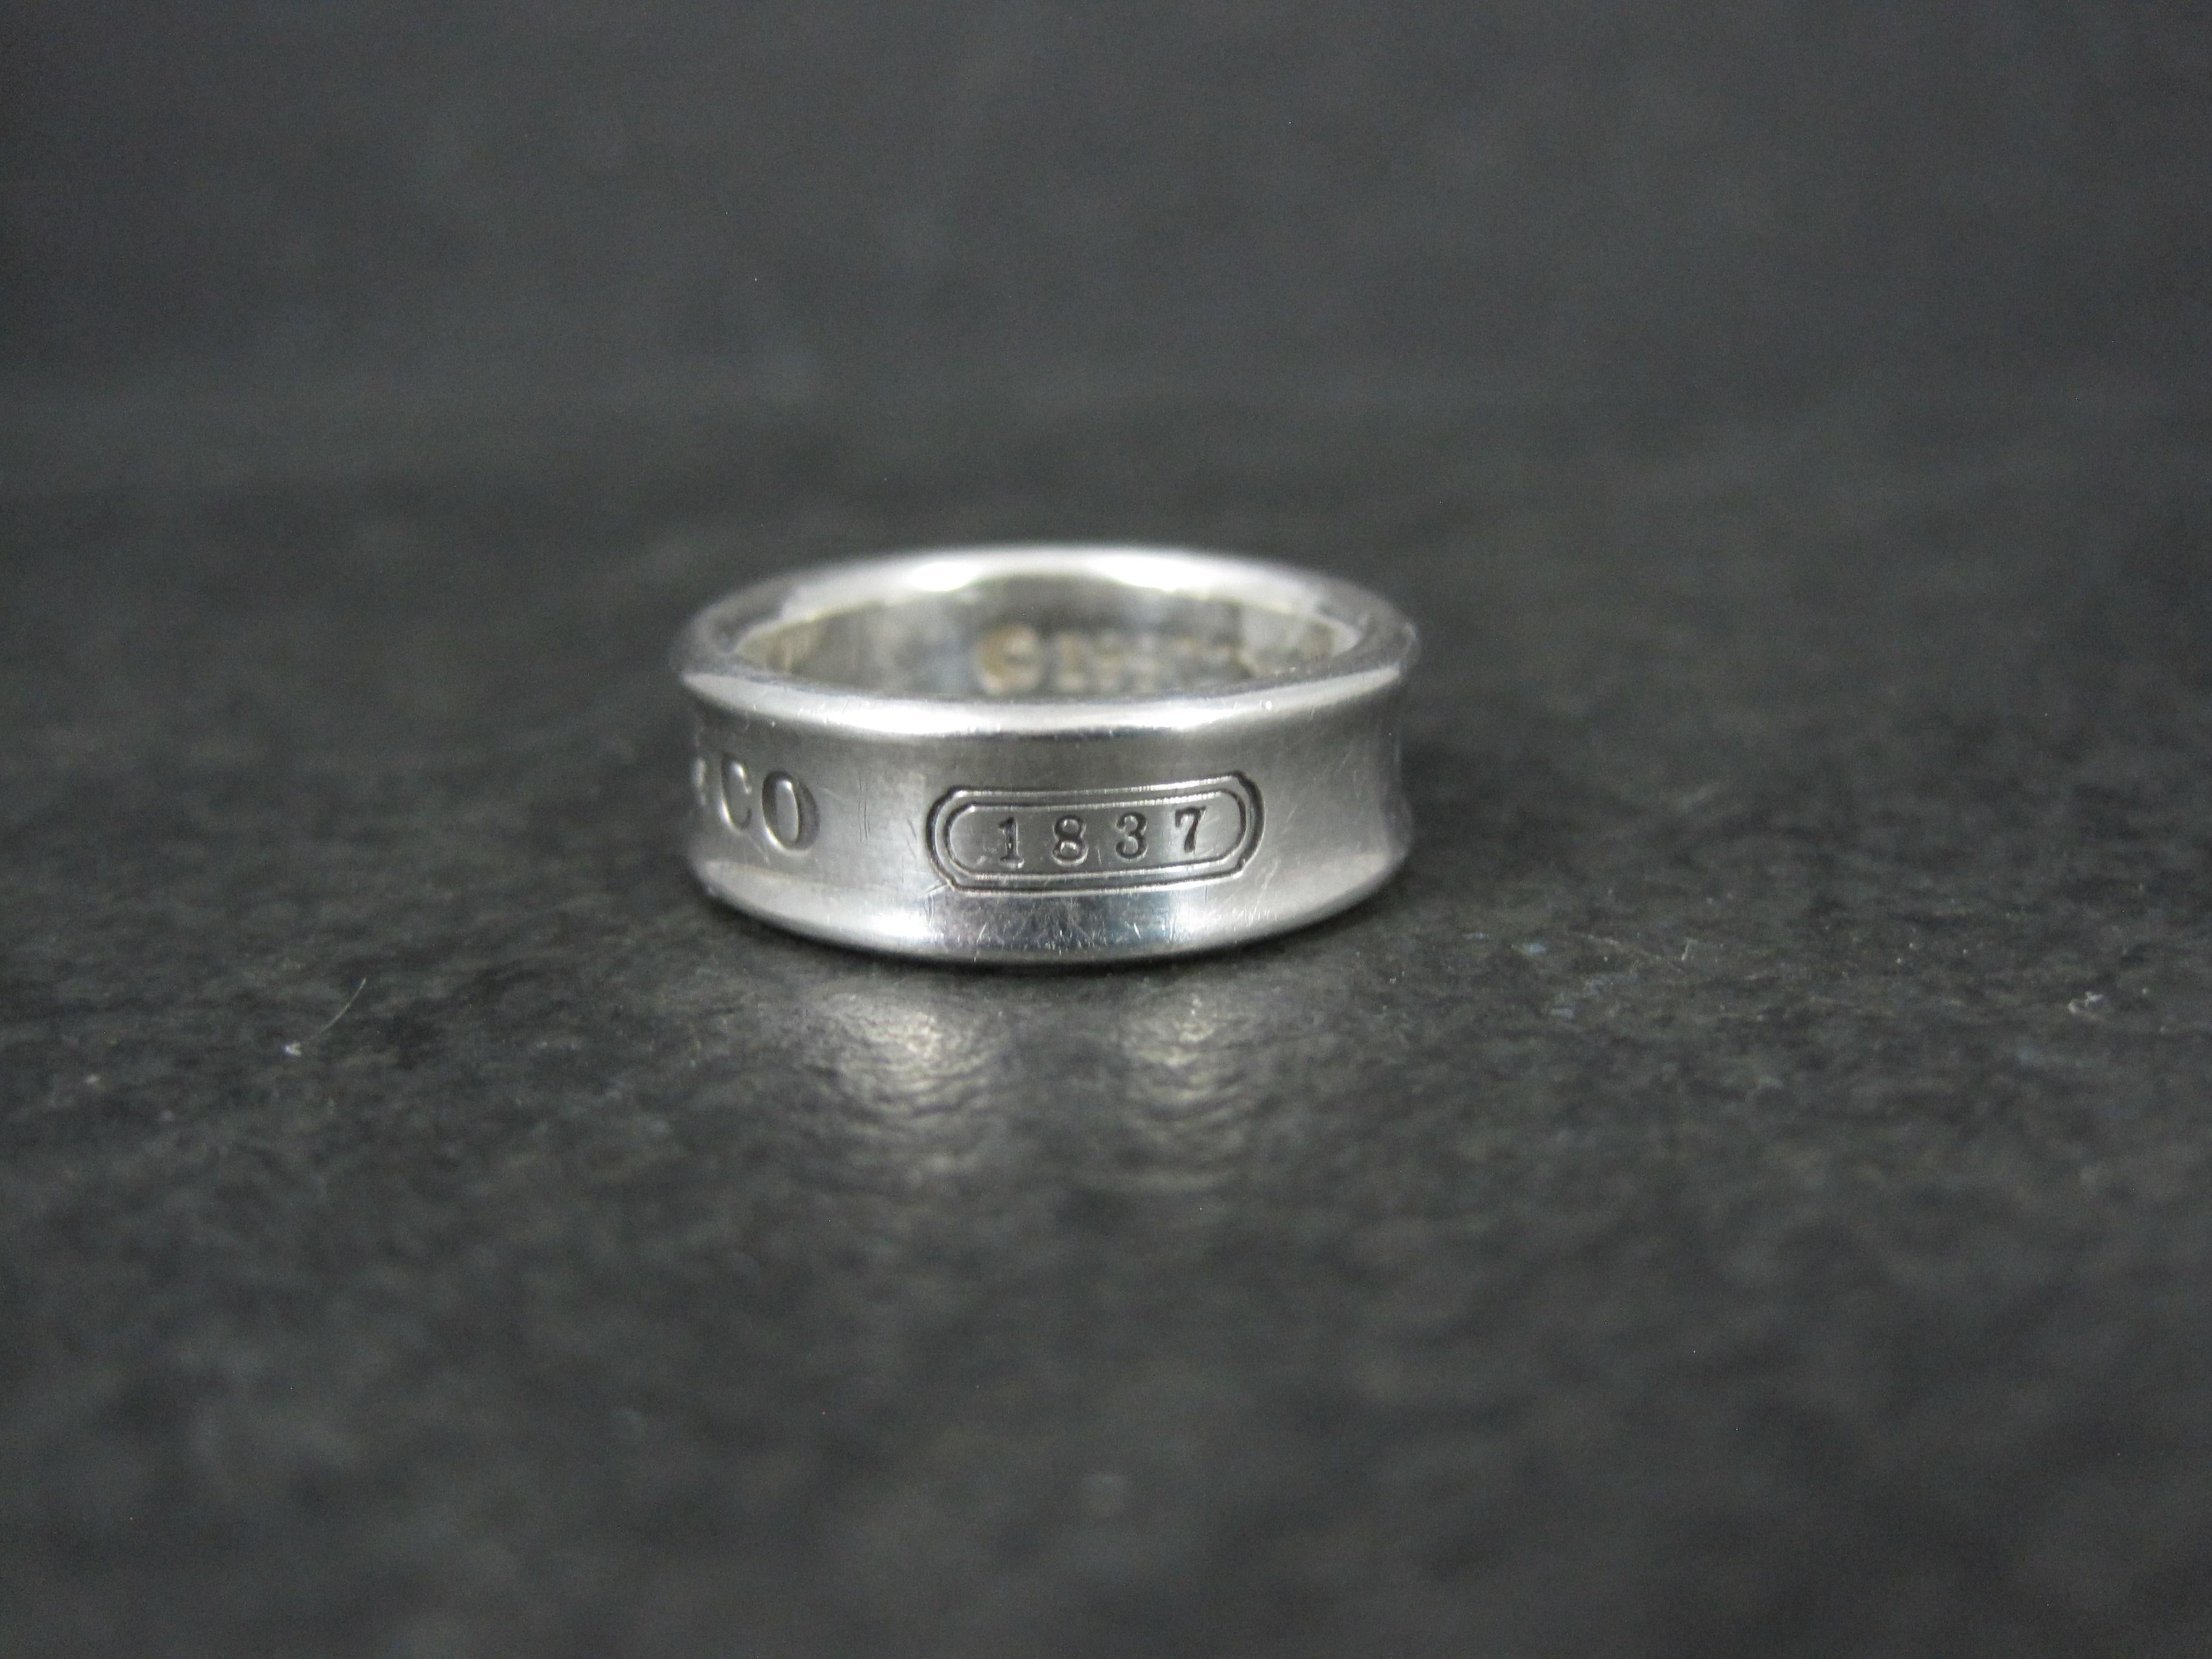 1997 Tiffany & Co 1837 Band Ring Sterling Silver Size 6.5 en vente 1